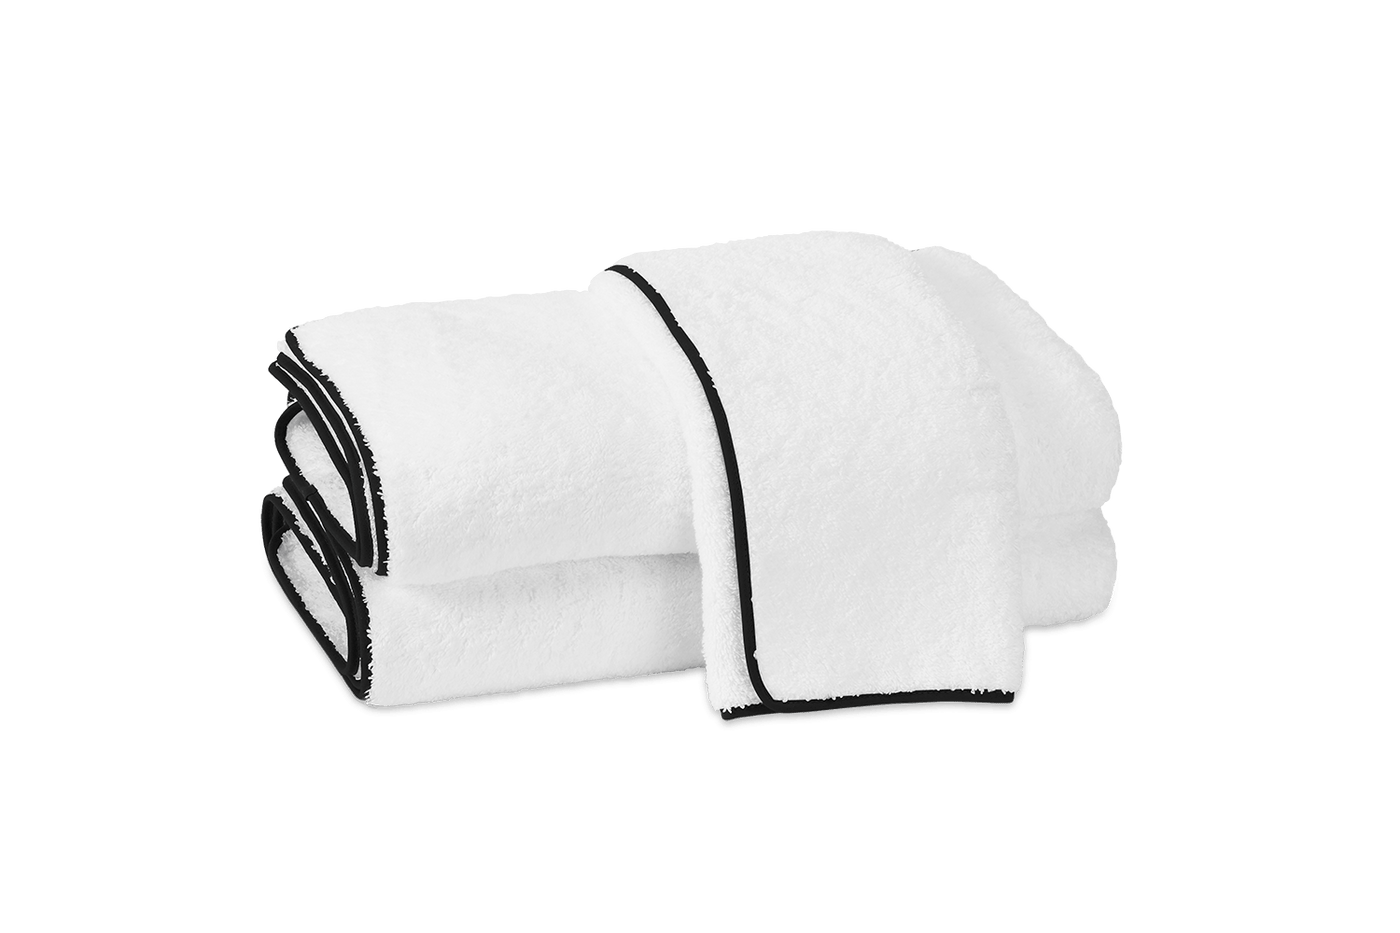 MATOUK CAIRO TOWEL COLLECTION WITH STRAIGHT PIPING (Colors 1-16)